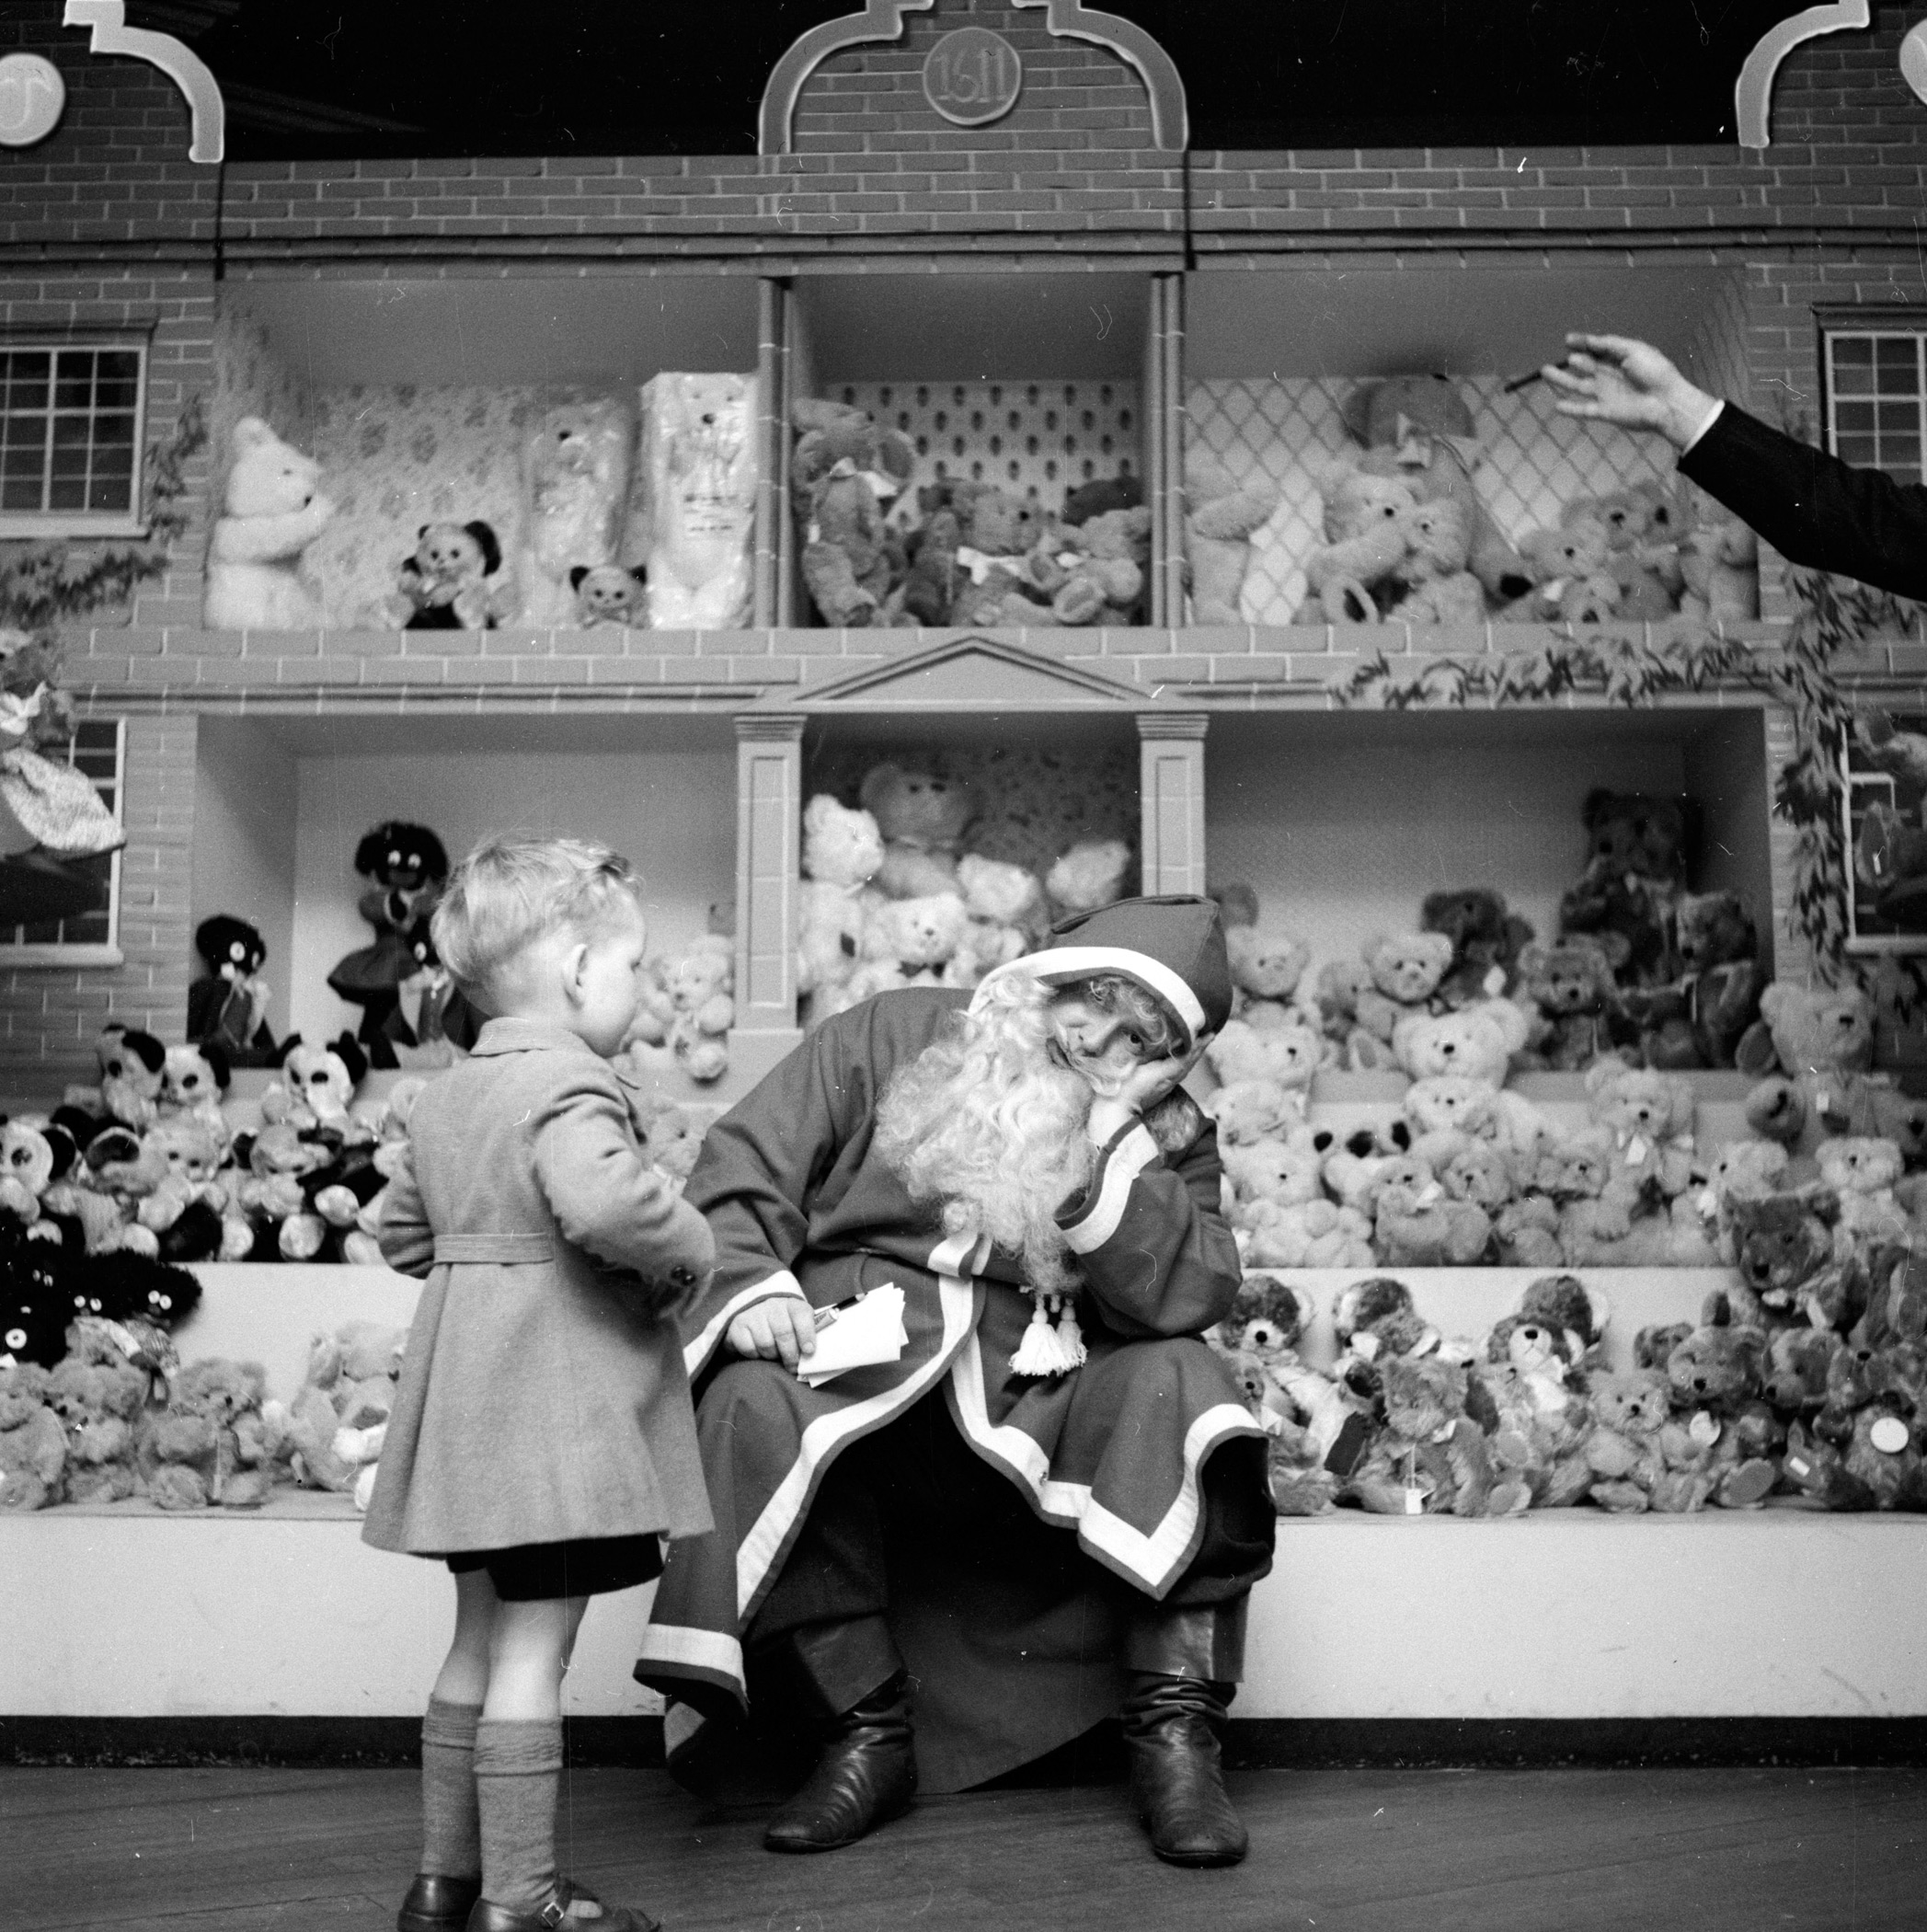 A resolutely tired Denzil Batchelor, in costume as Father Christmas, wearily answers another child's question at Harrods department store in London. December 1953.